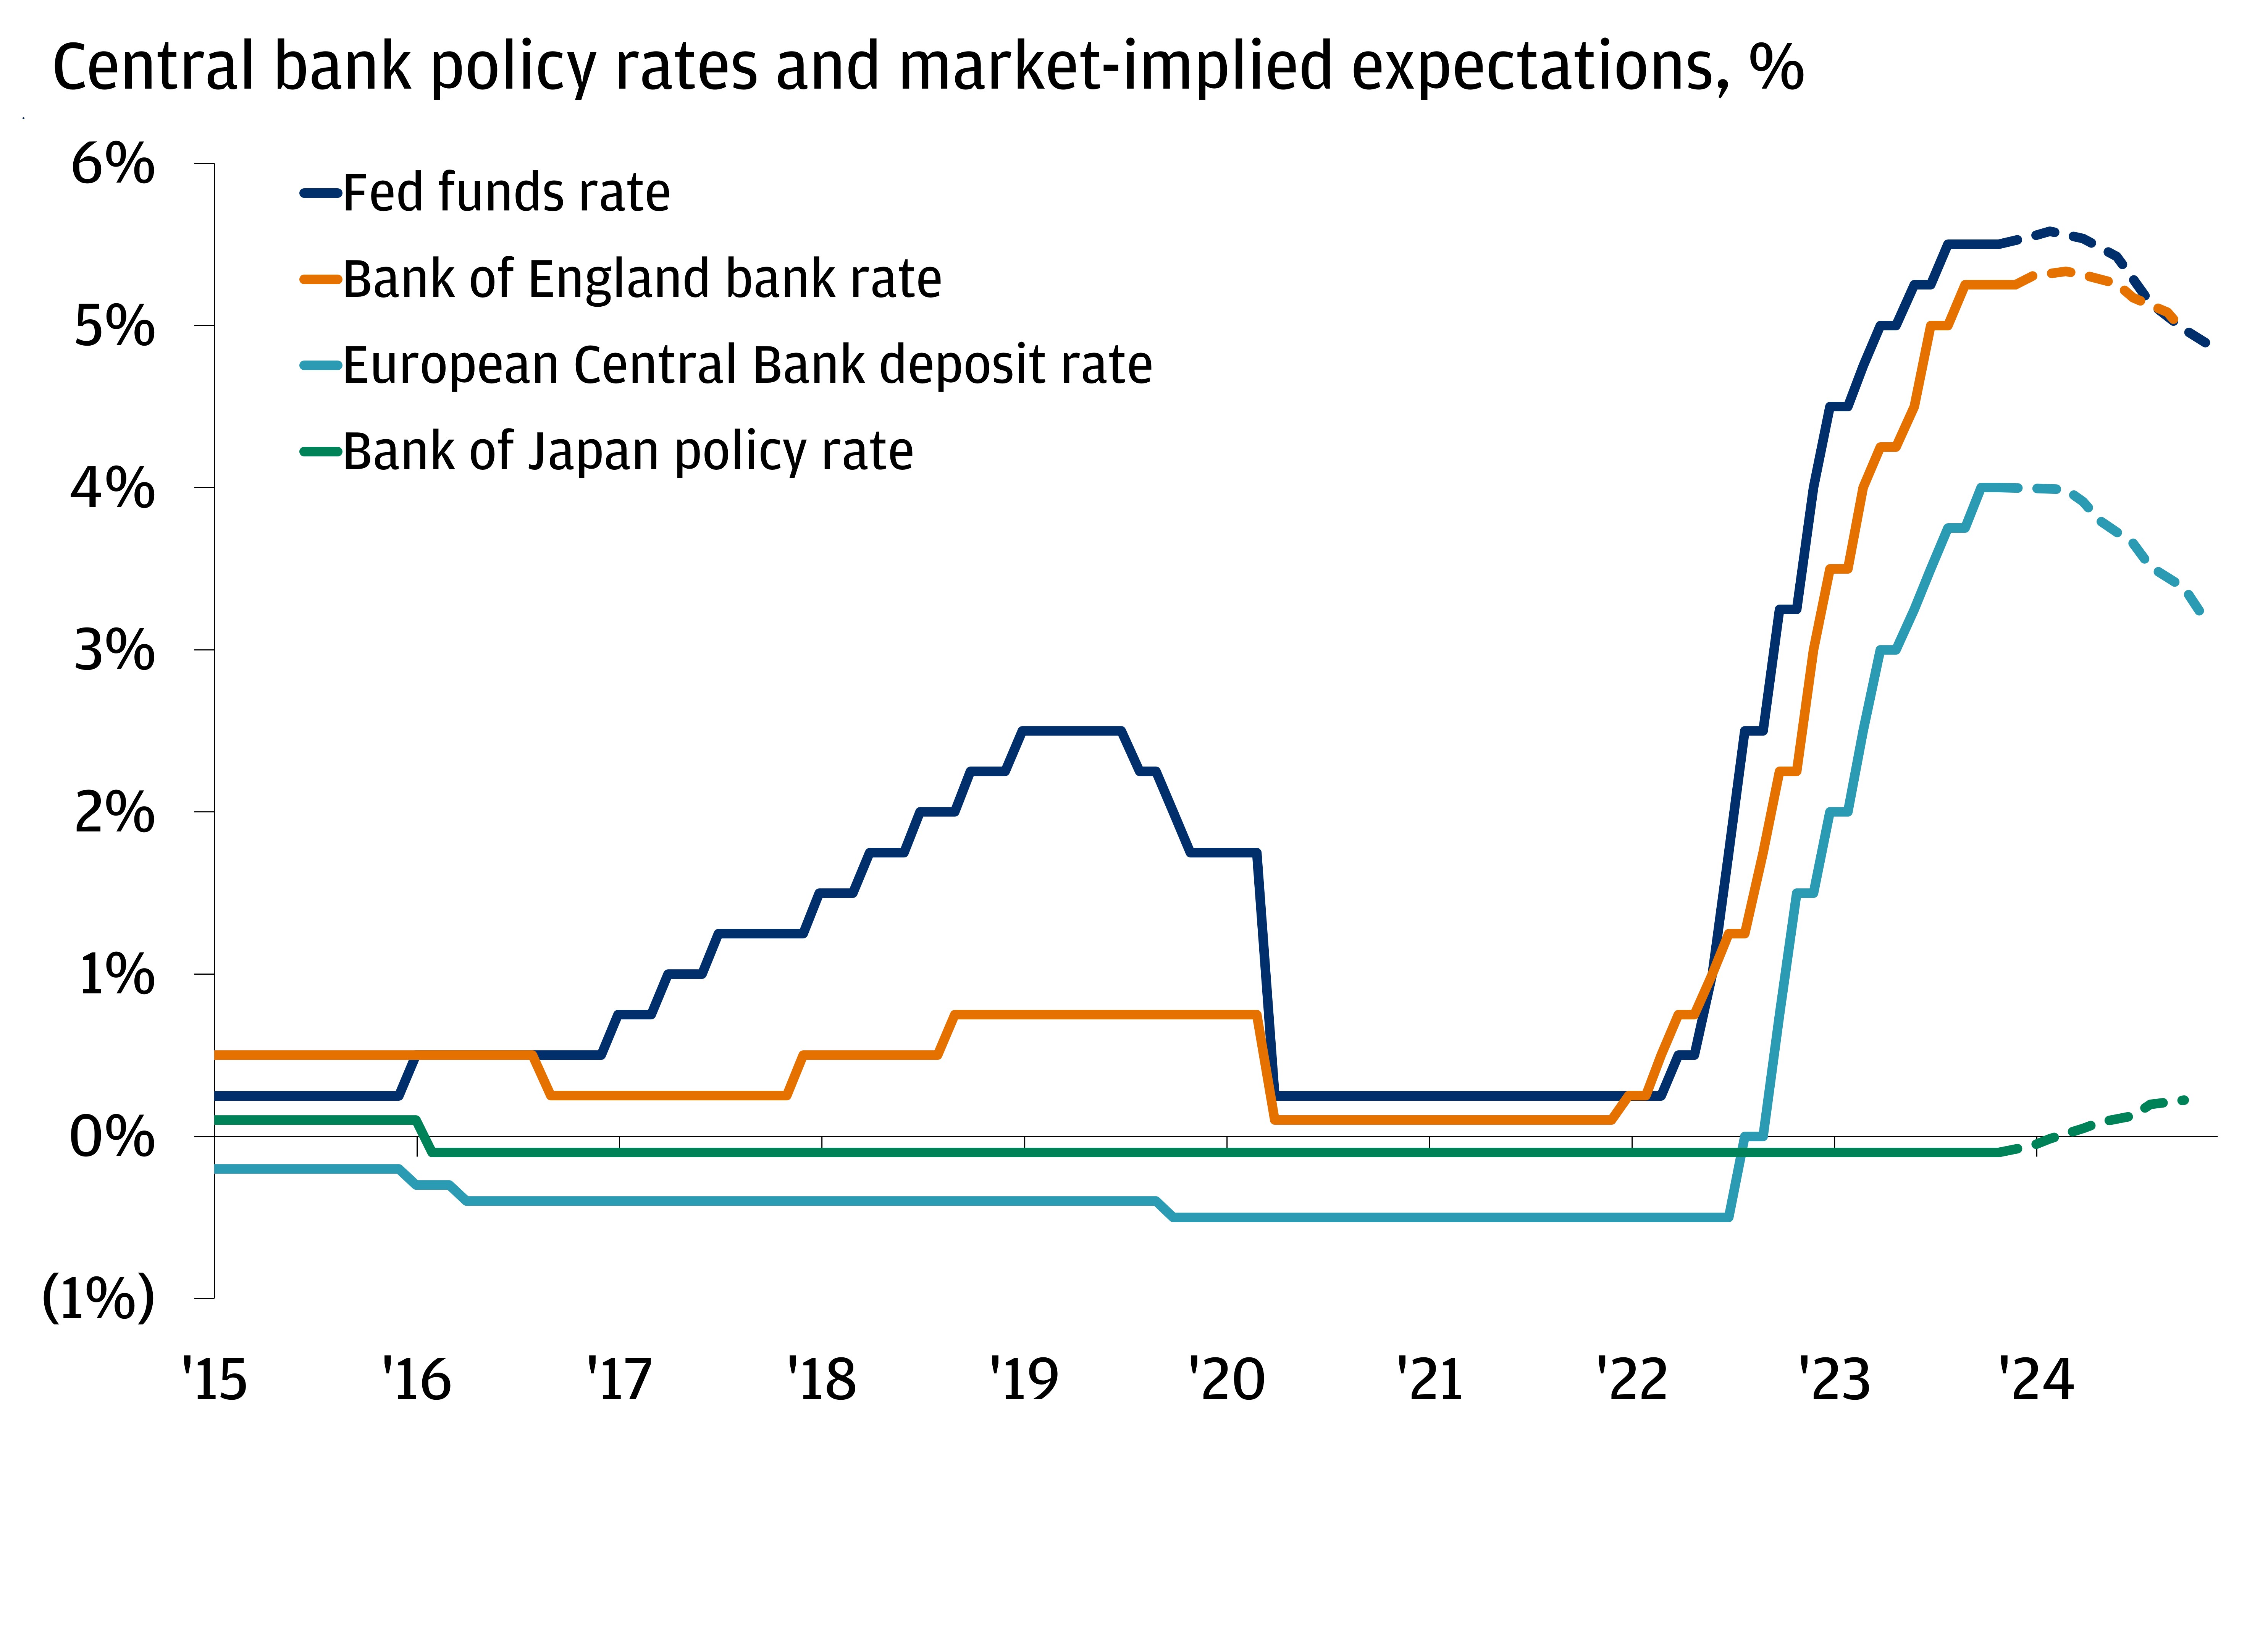 The chart is a line graph of the historical and implied policy rates across four central banks: the Federal Reserve, the Bank of England, the European Central Bank and the Bank of Japan.